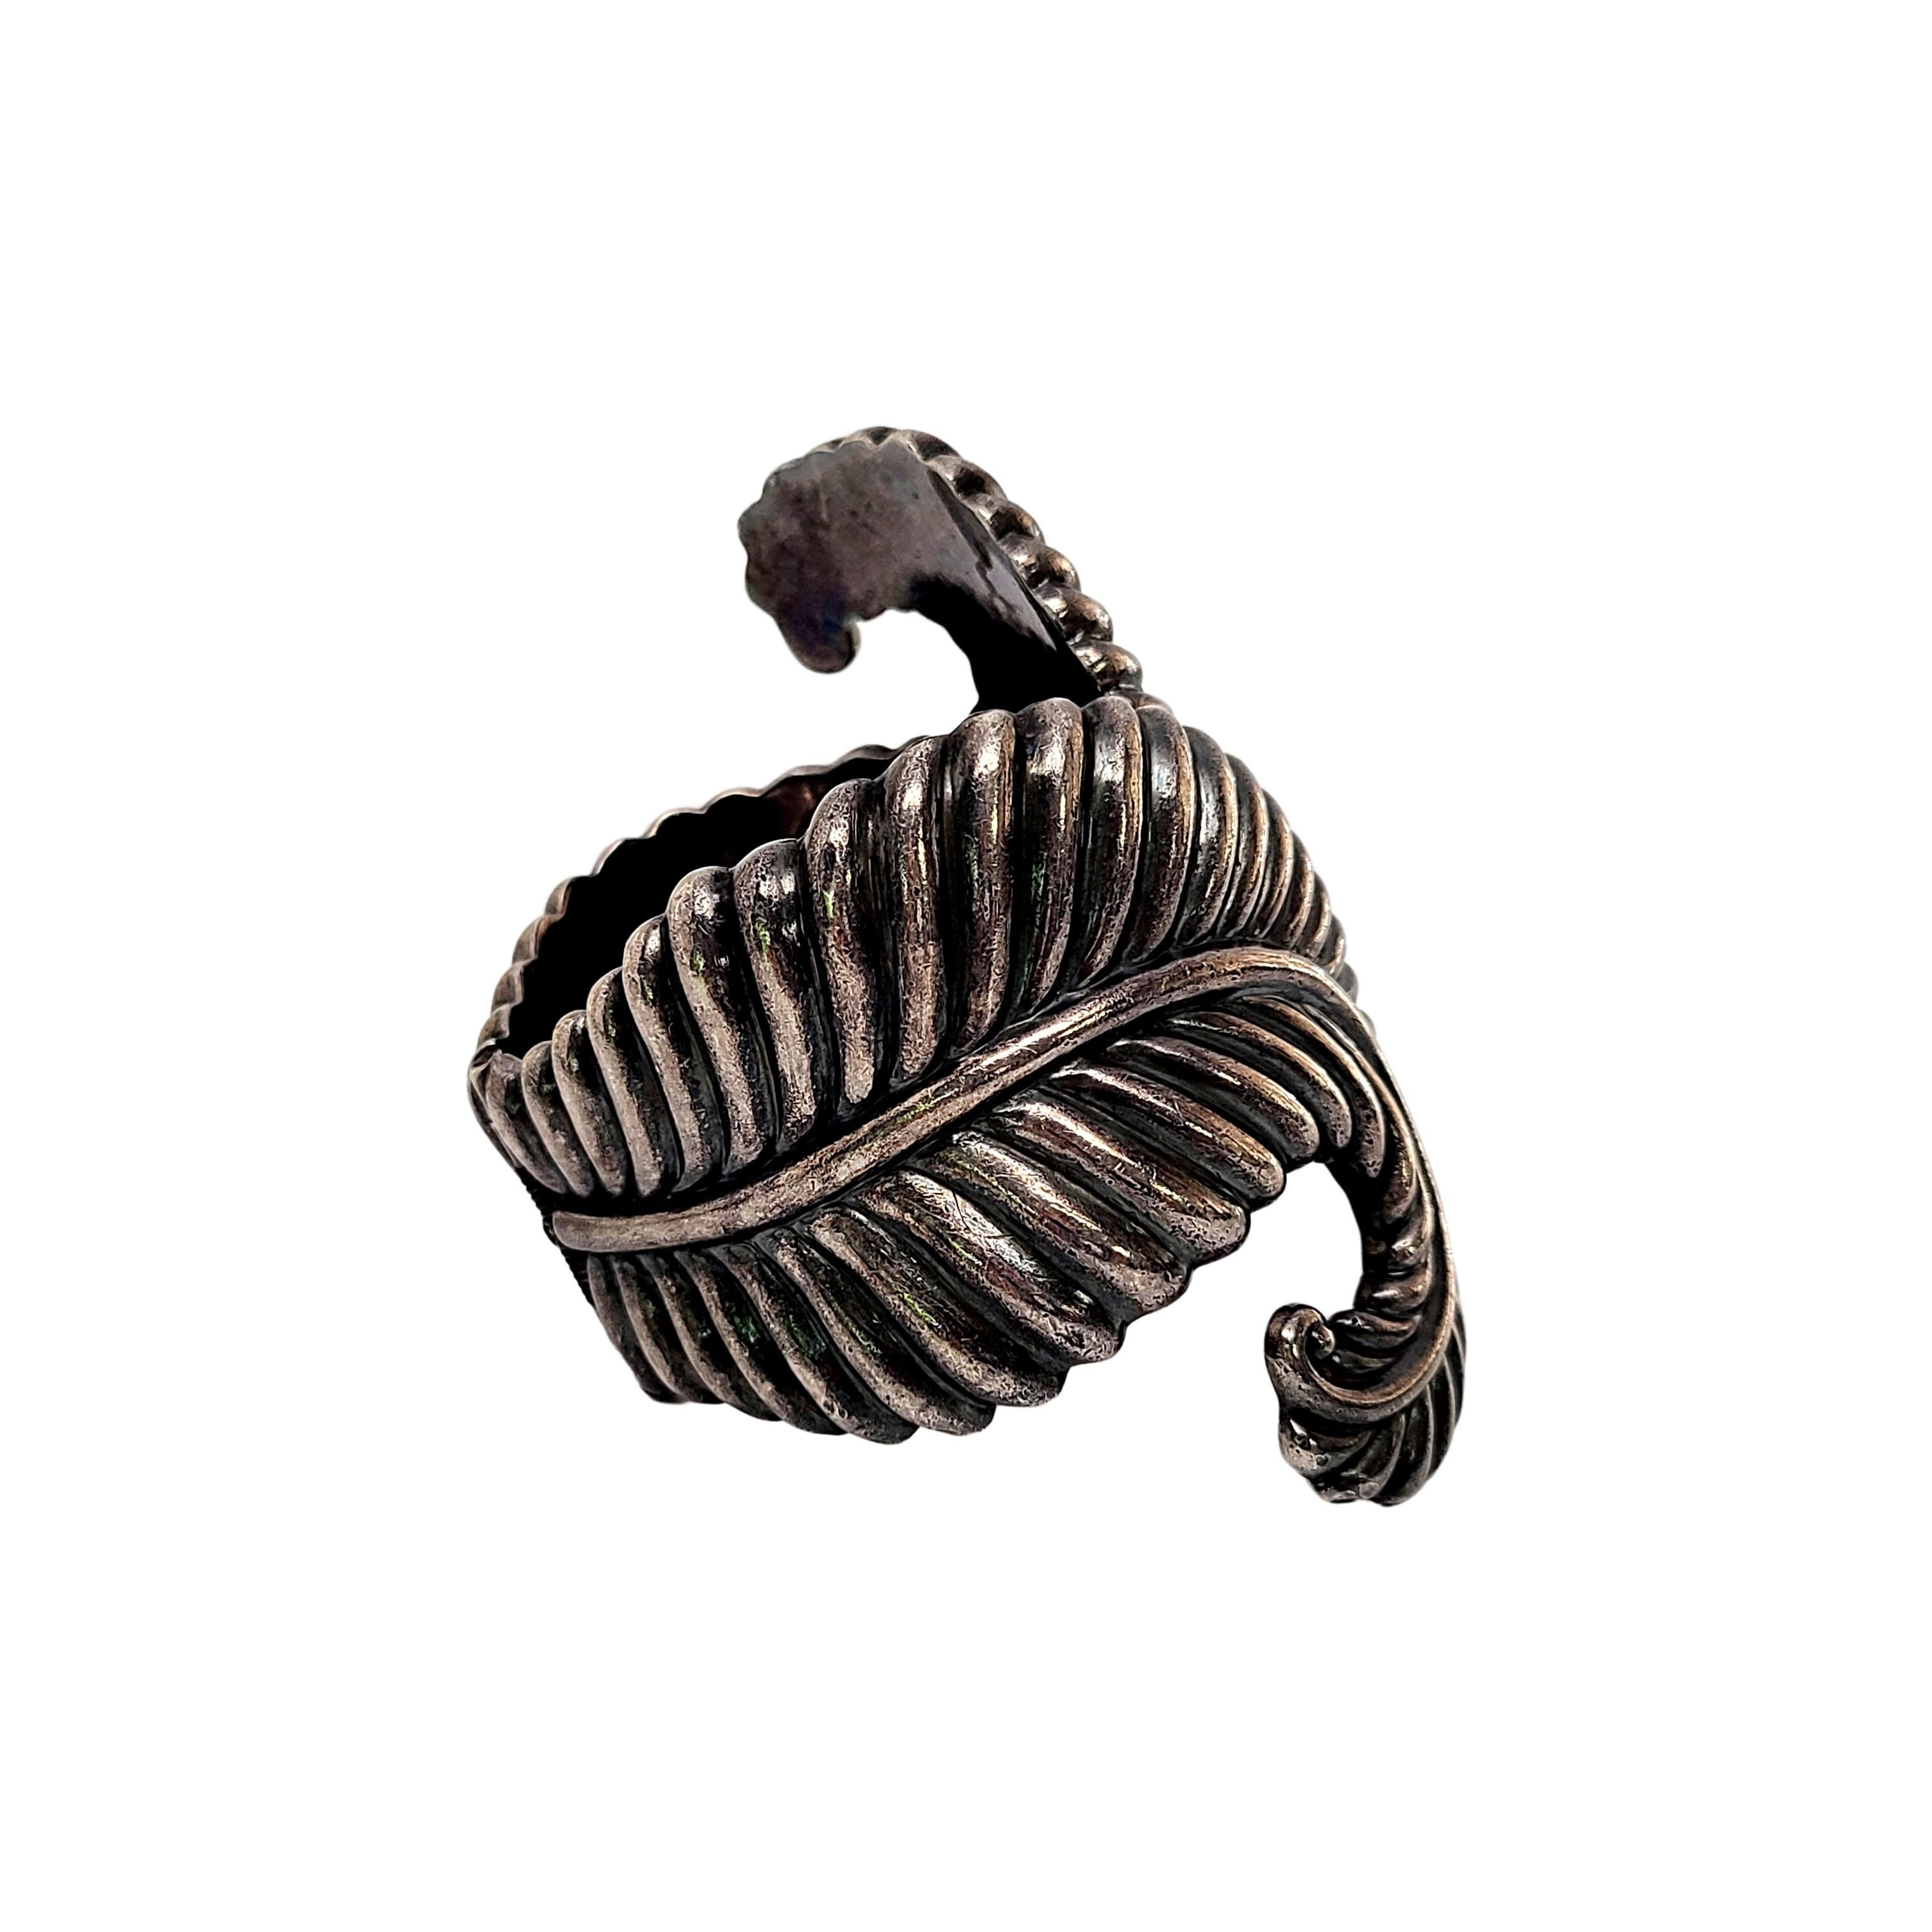 Sterling silver clamper bracelet by Los Castillo of Mexico, circa 1950s.

Renowned Mexican silversmith, Los Castillo, designed this large and substantial clamper bracelet, design #238. It features curved fern fronds with a spring hinge.

Measures